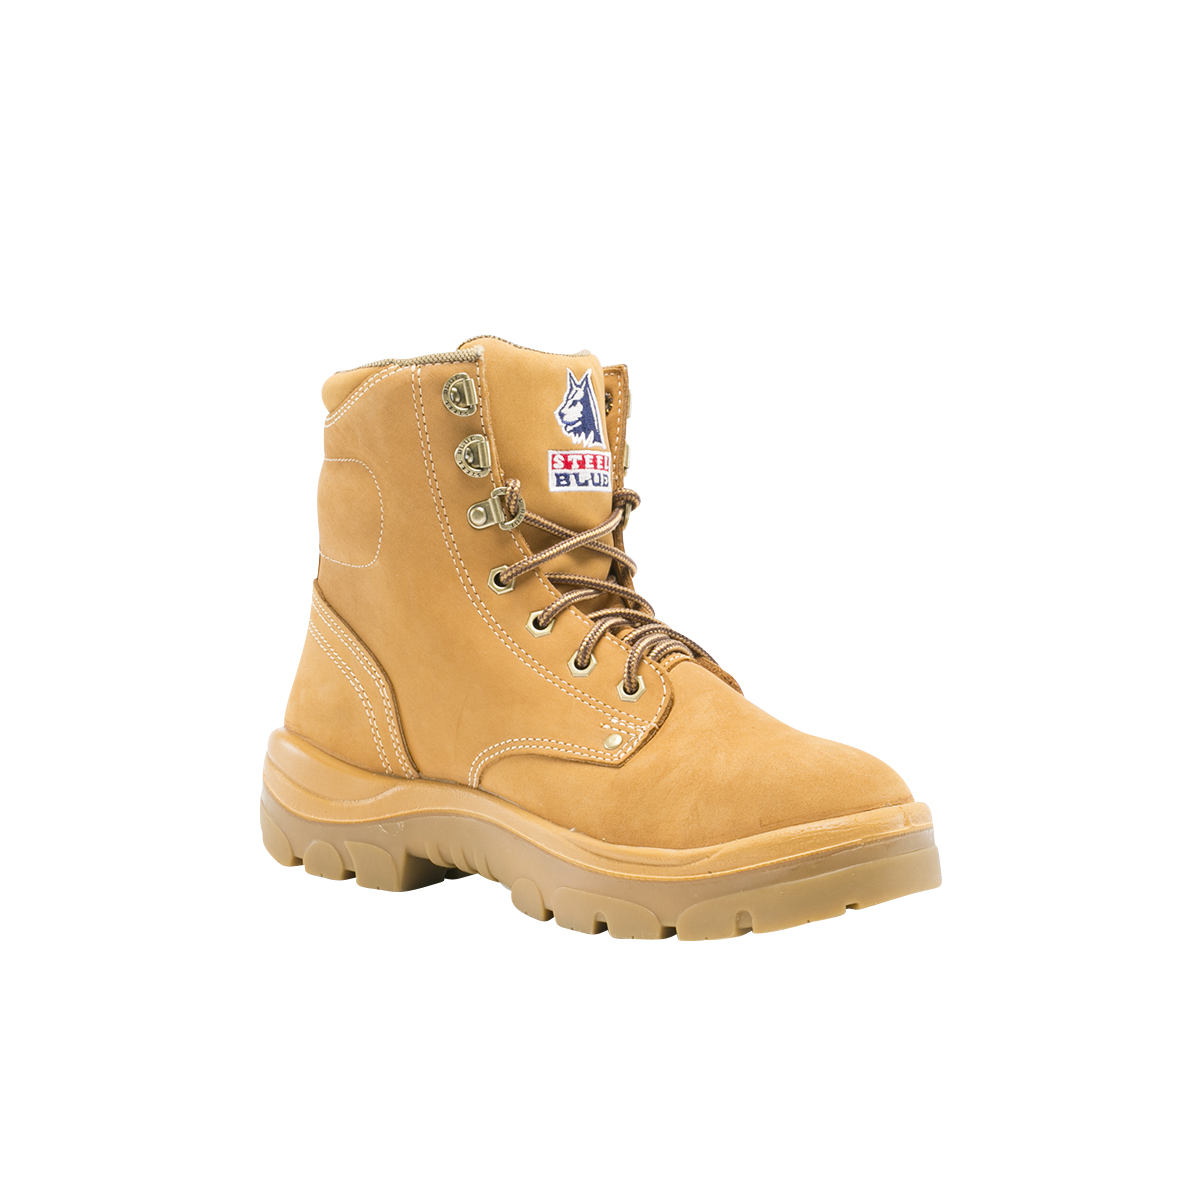 SAFETY BOOT ARGYLE NITRILE S10 -ANKLE LACE UP WHEAT